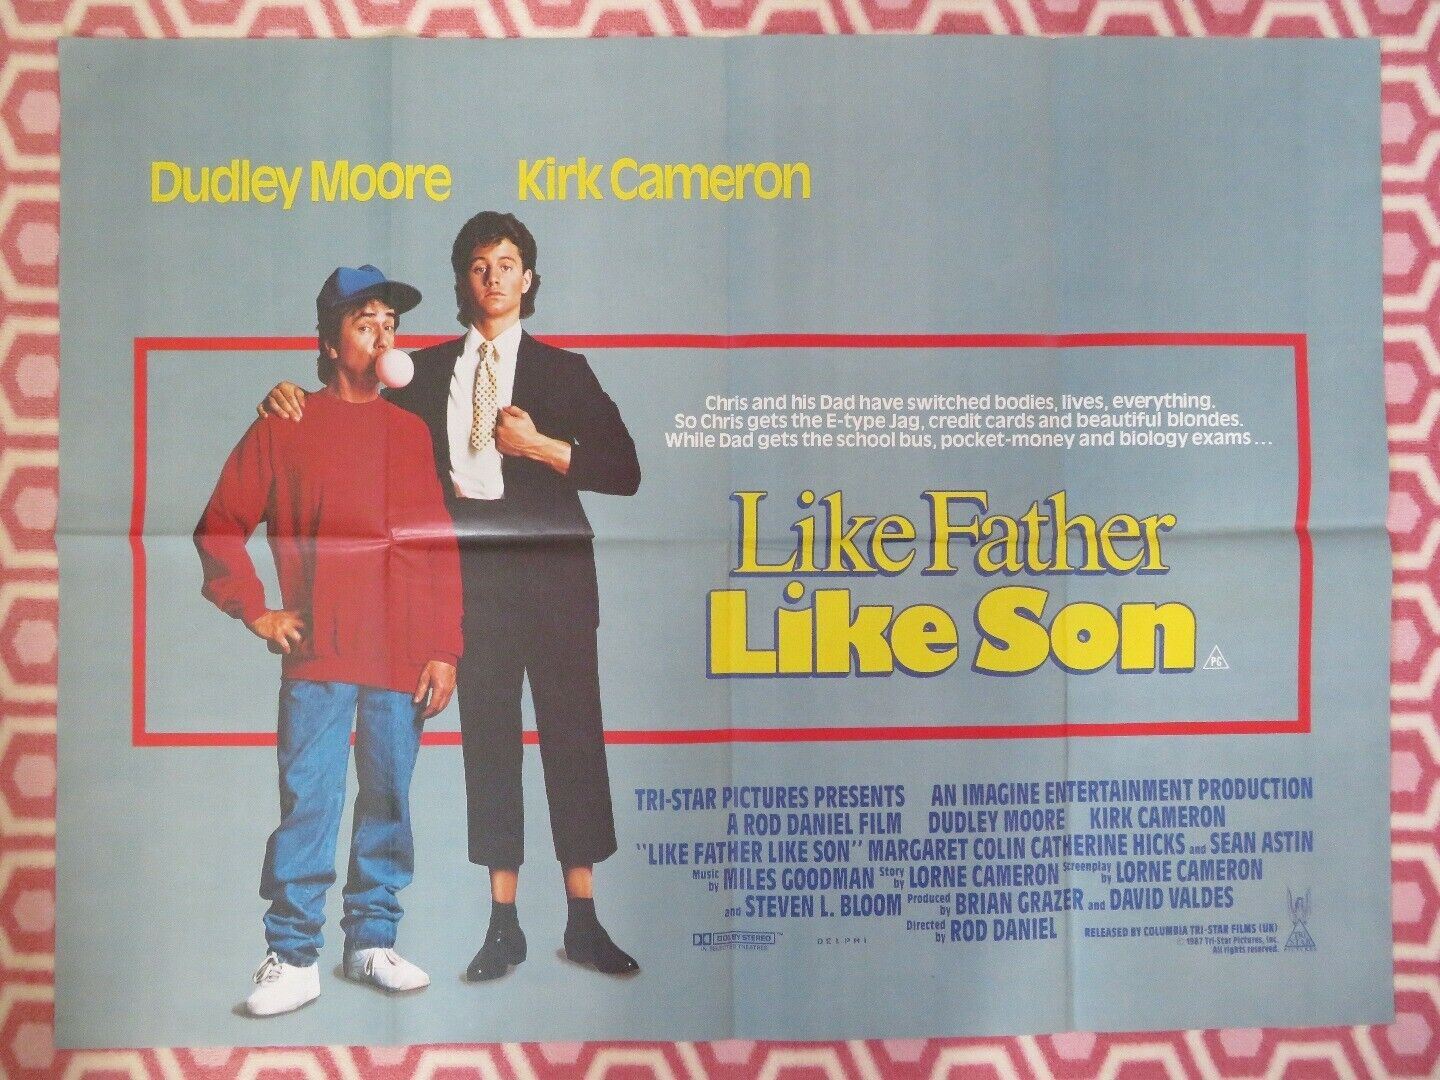 1987 Dudley Moore & Kirk Cameron star in Like Father Like Son